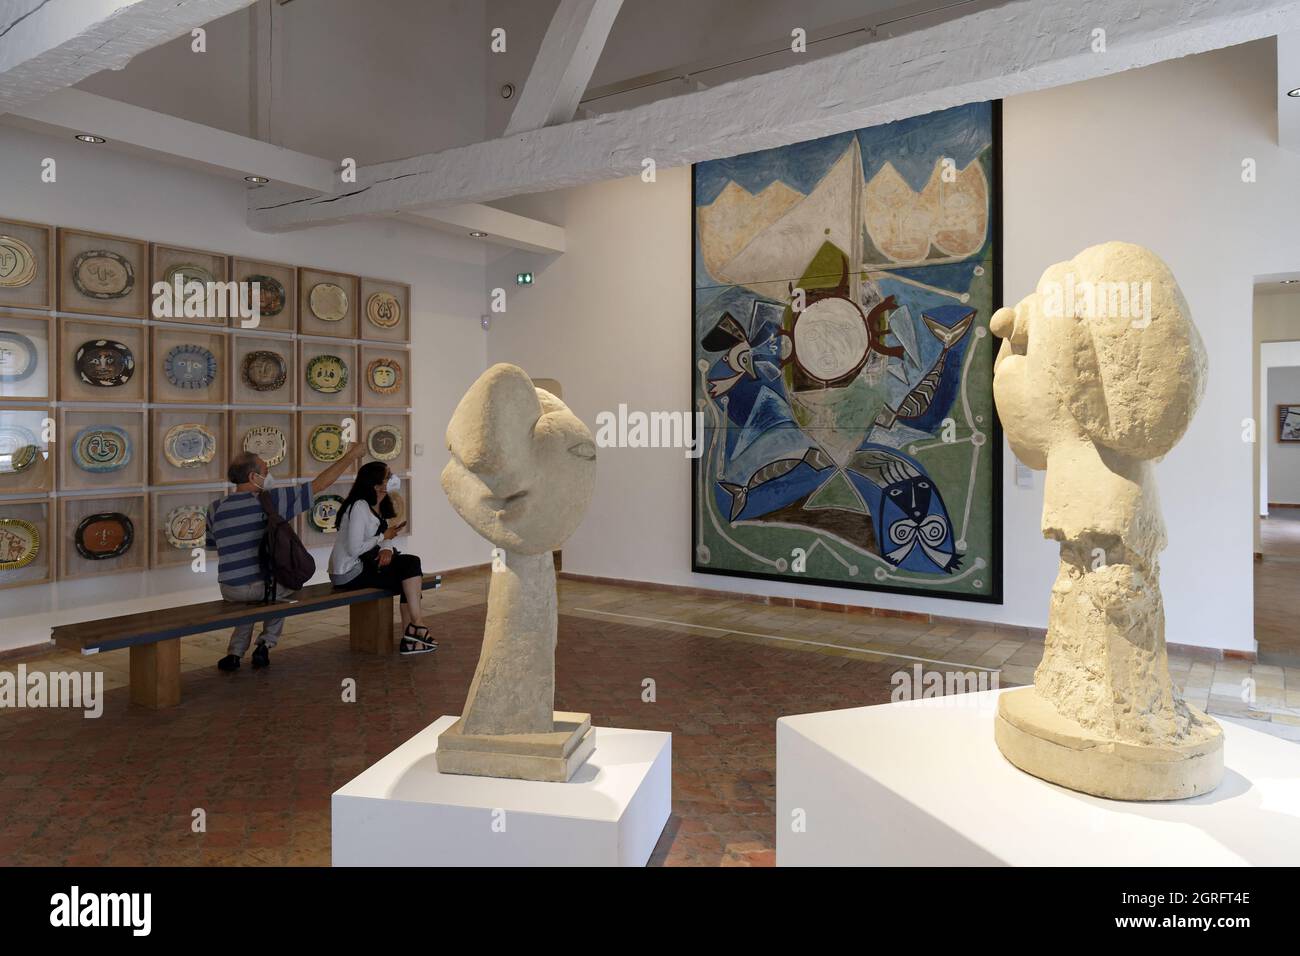 France, Alpes Maritimes, Antibes, old town, Picasso Museum, permanent exhibition of works by Pablo Picasso, sculpture of a lady's head with chignon and lady's head with big eyes Stock Photo